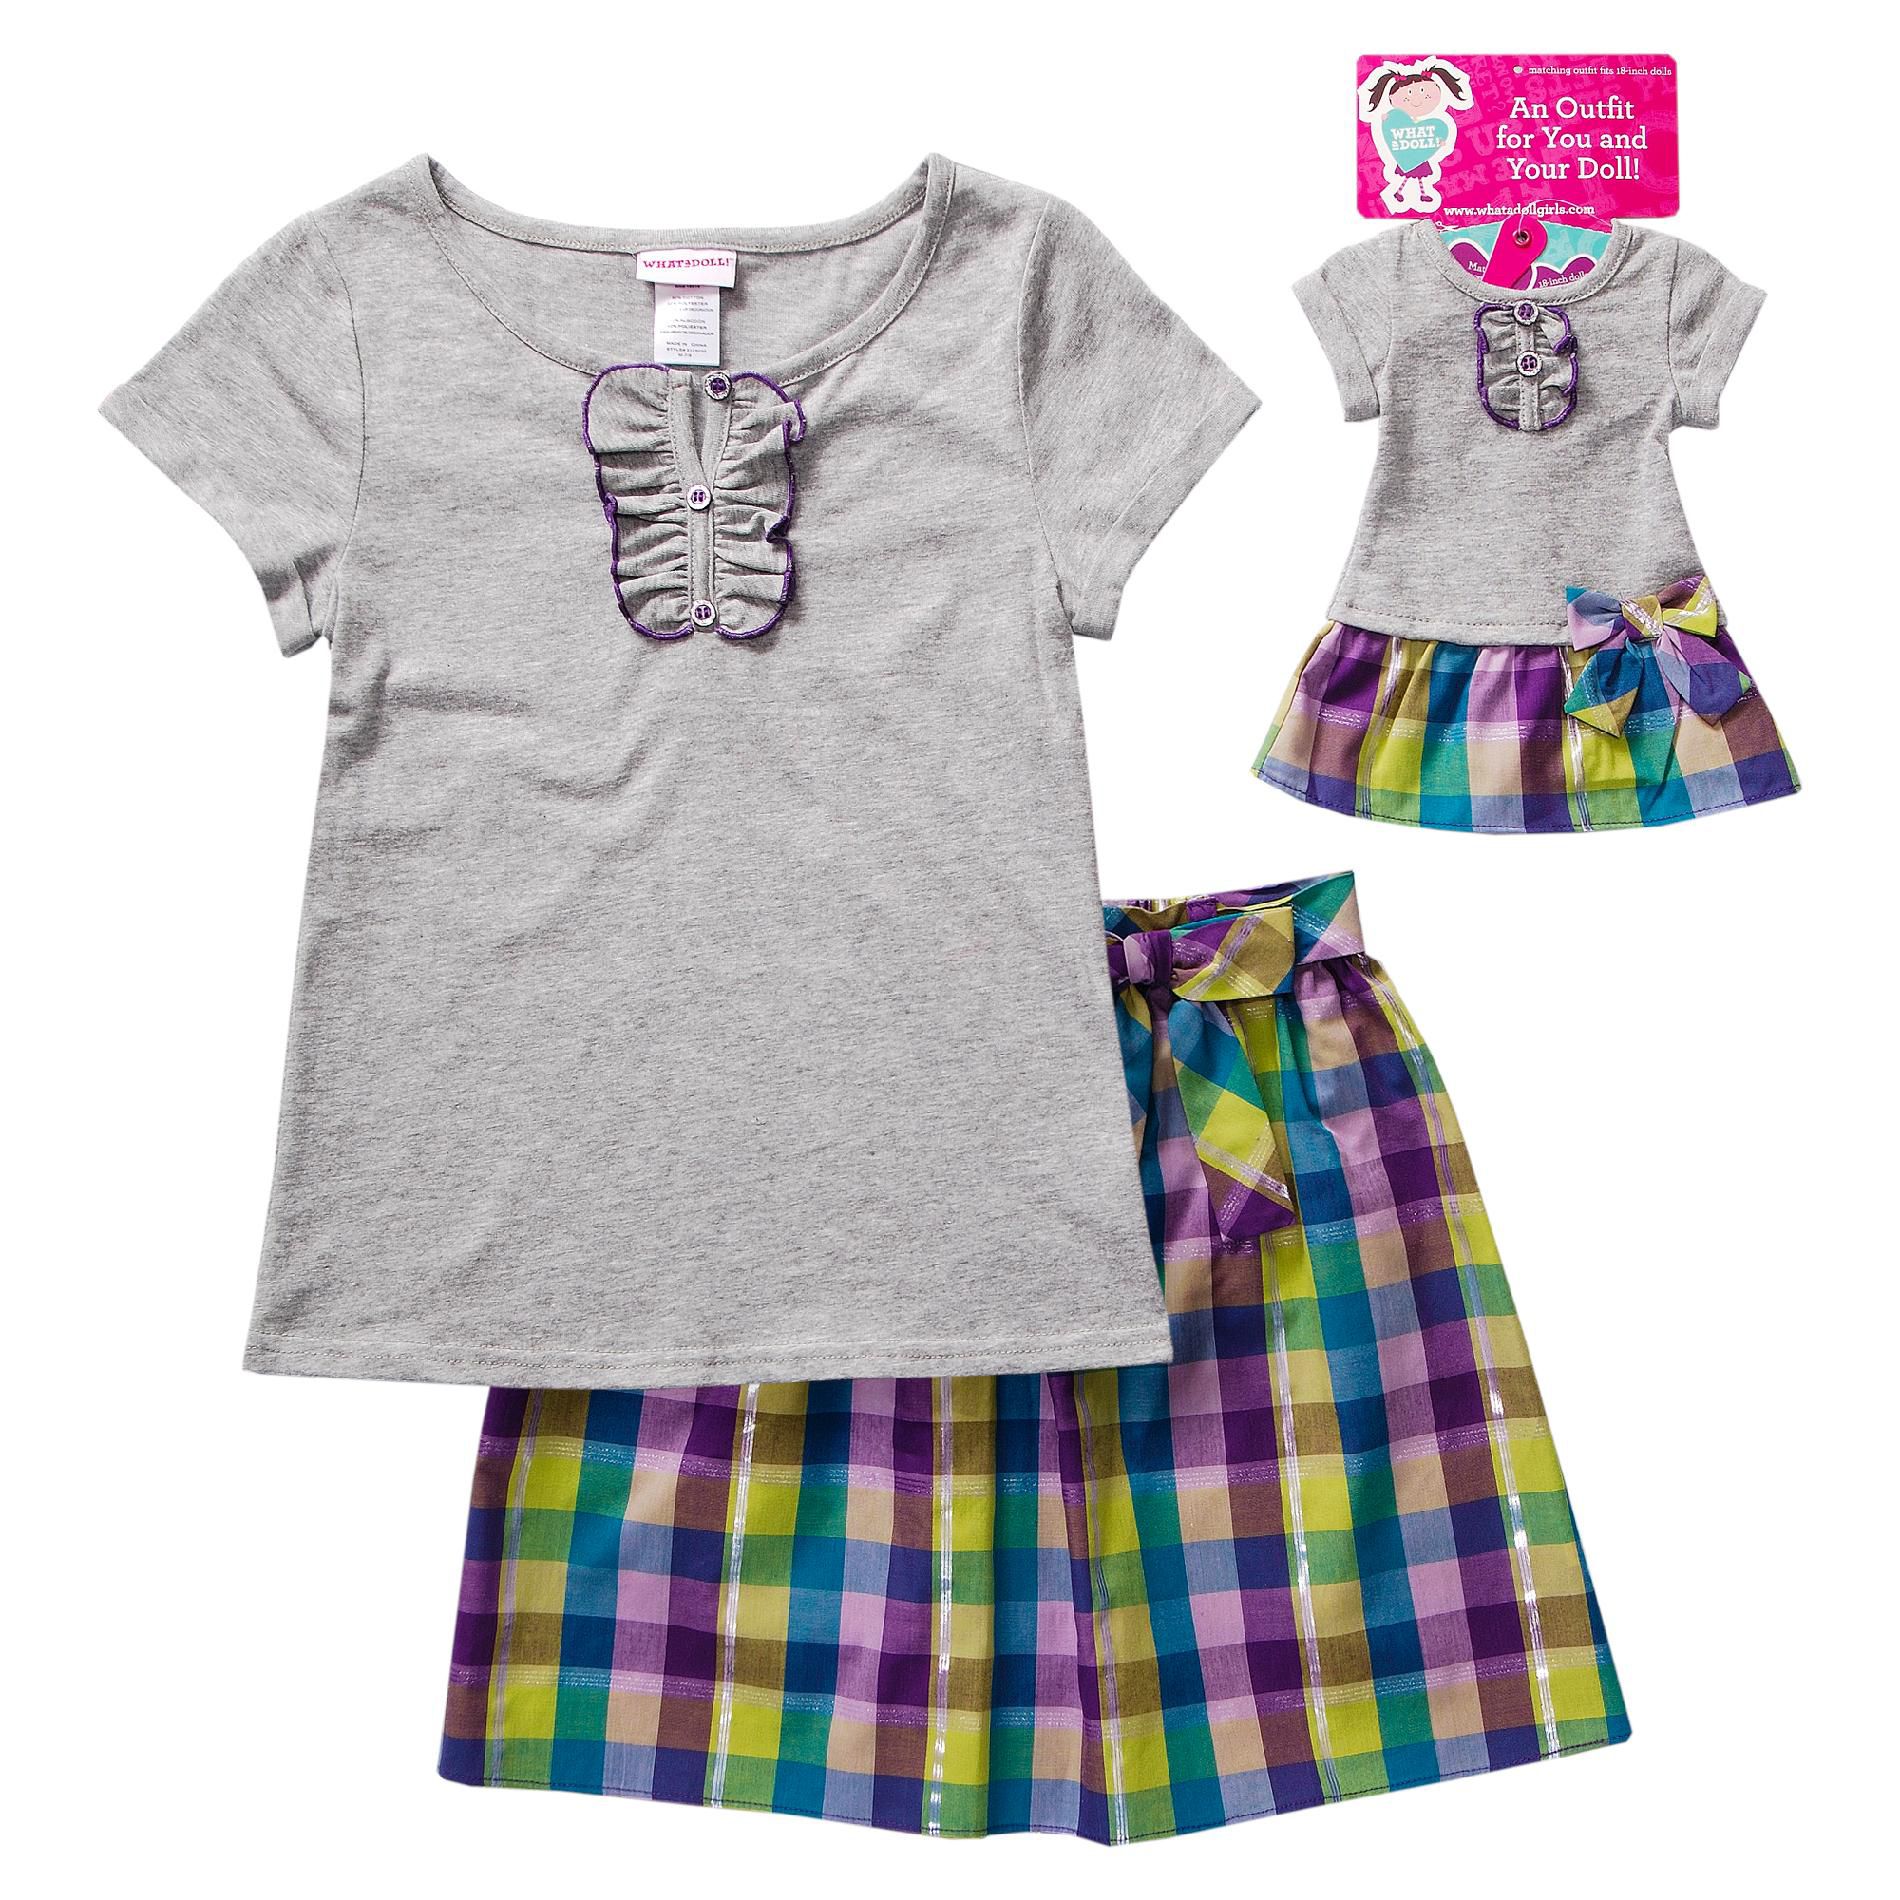 What A Doll Girl's Plaid Skirt & Henley Shirt with Doll Outfit